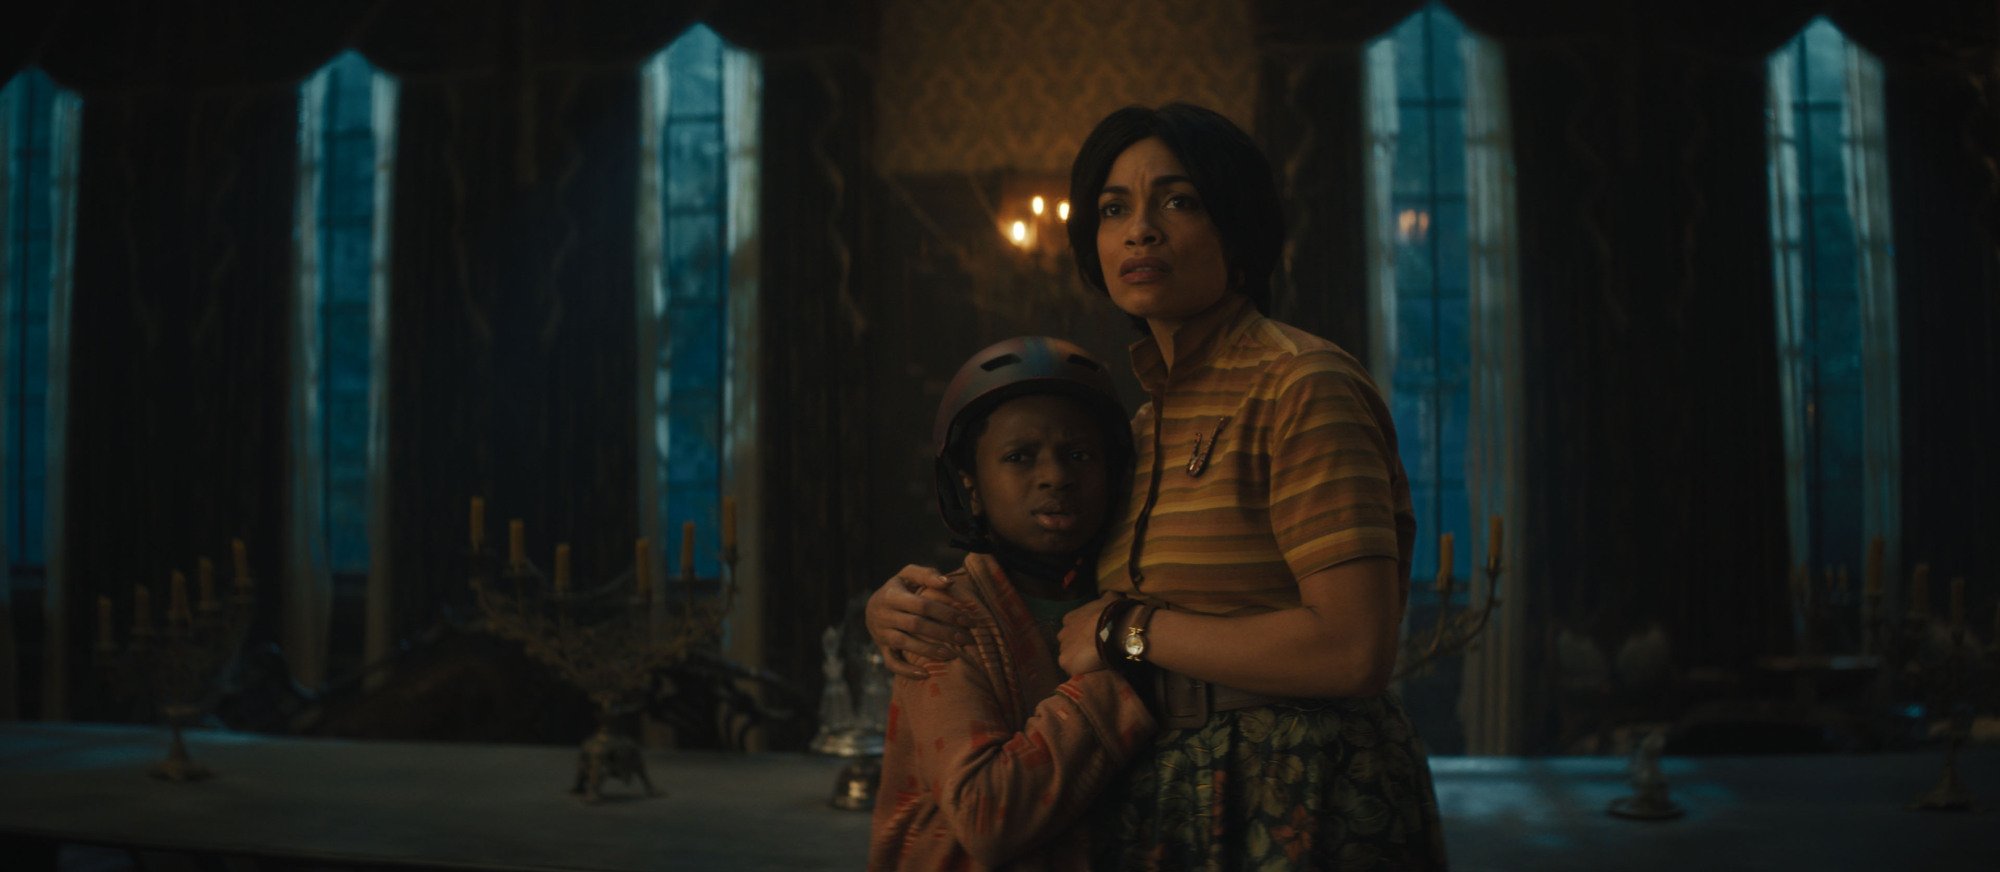 Chase Dillon as Travis and Rosario Dawson as Gabbie in Disney's live-action "Haunted Mansion."